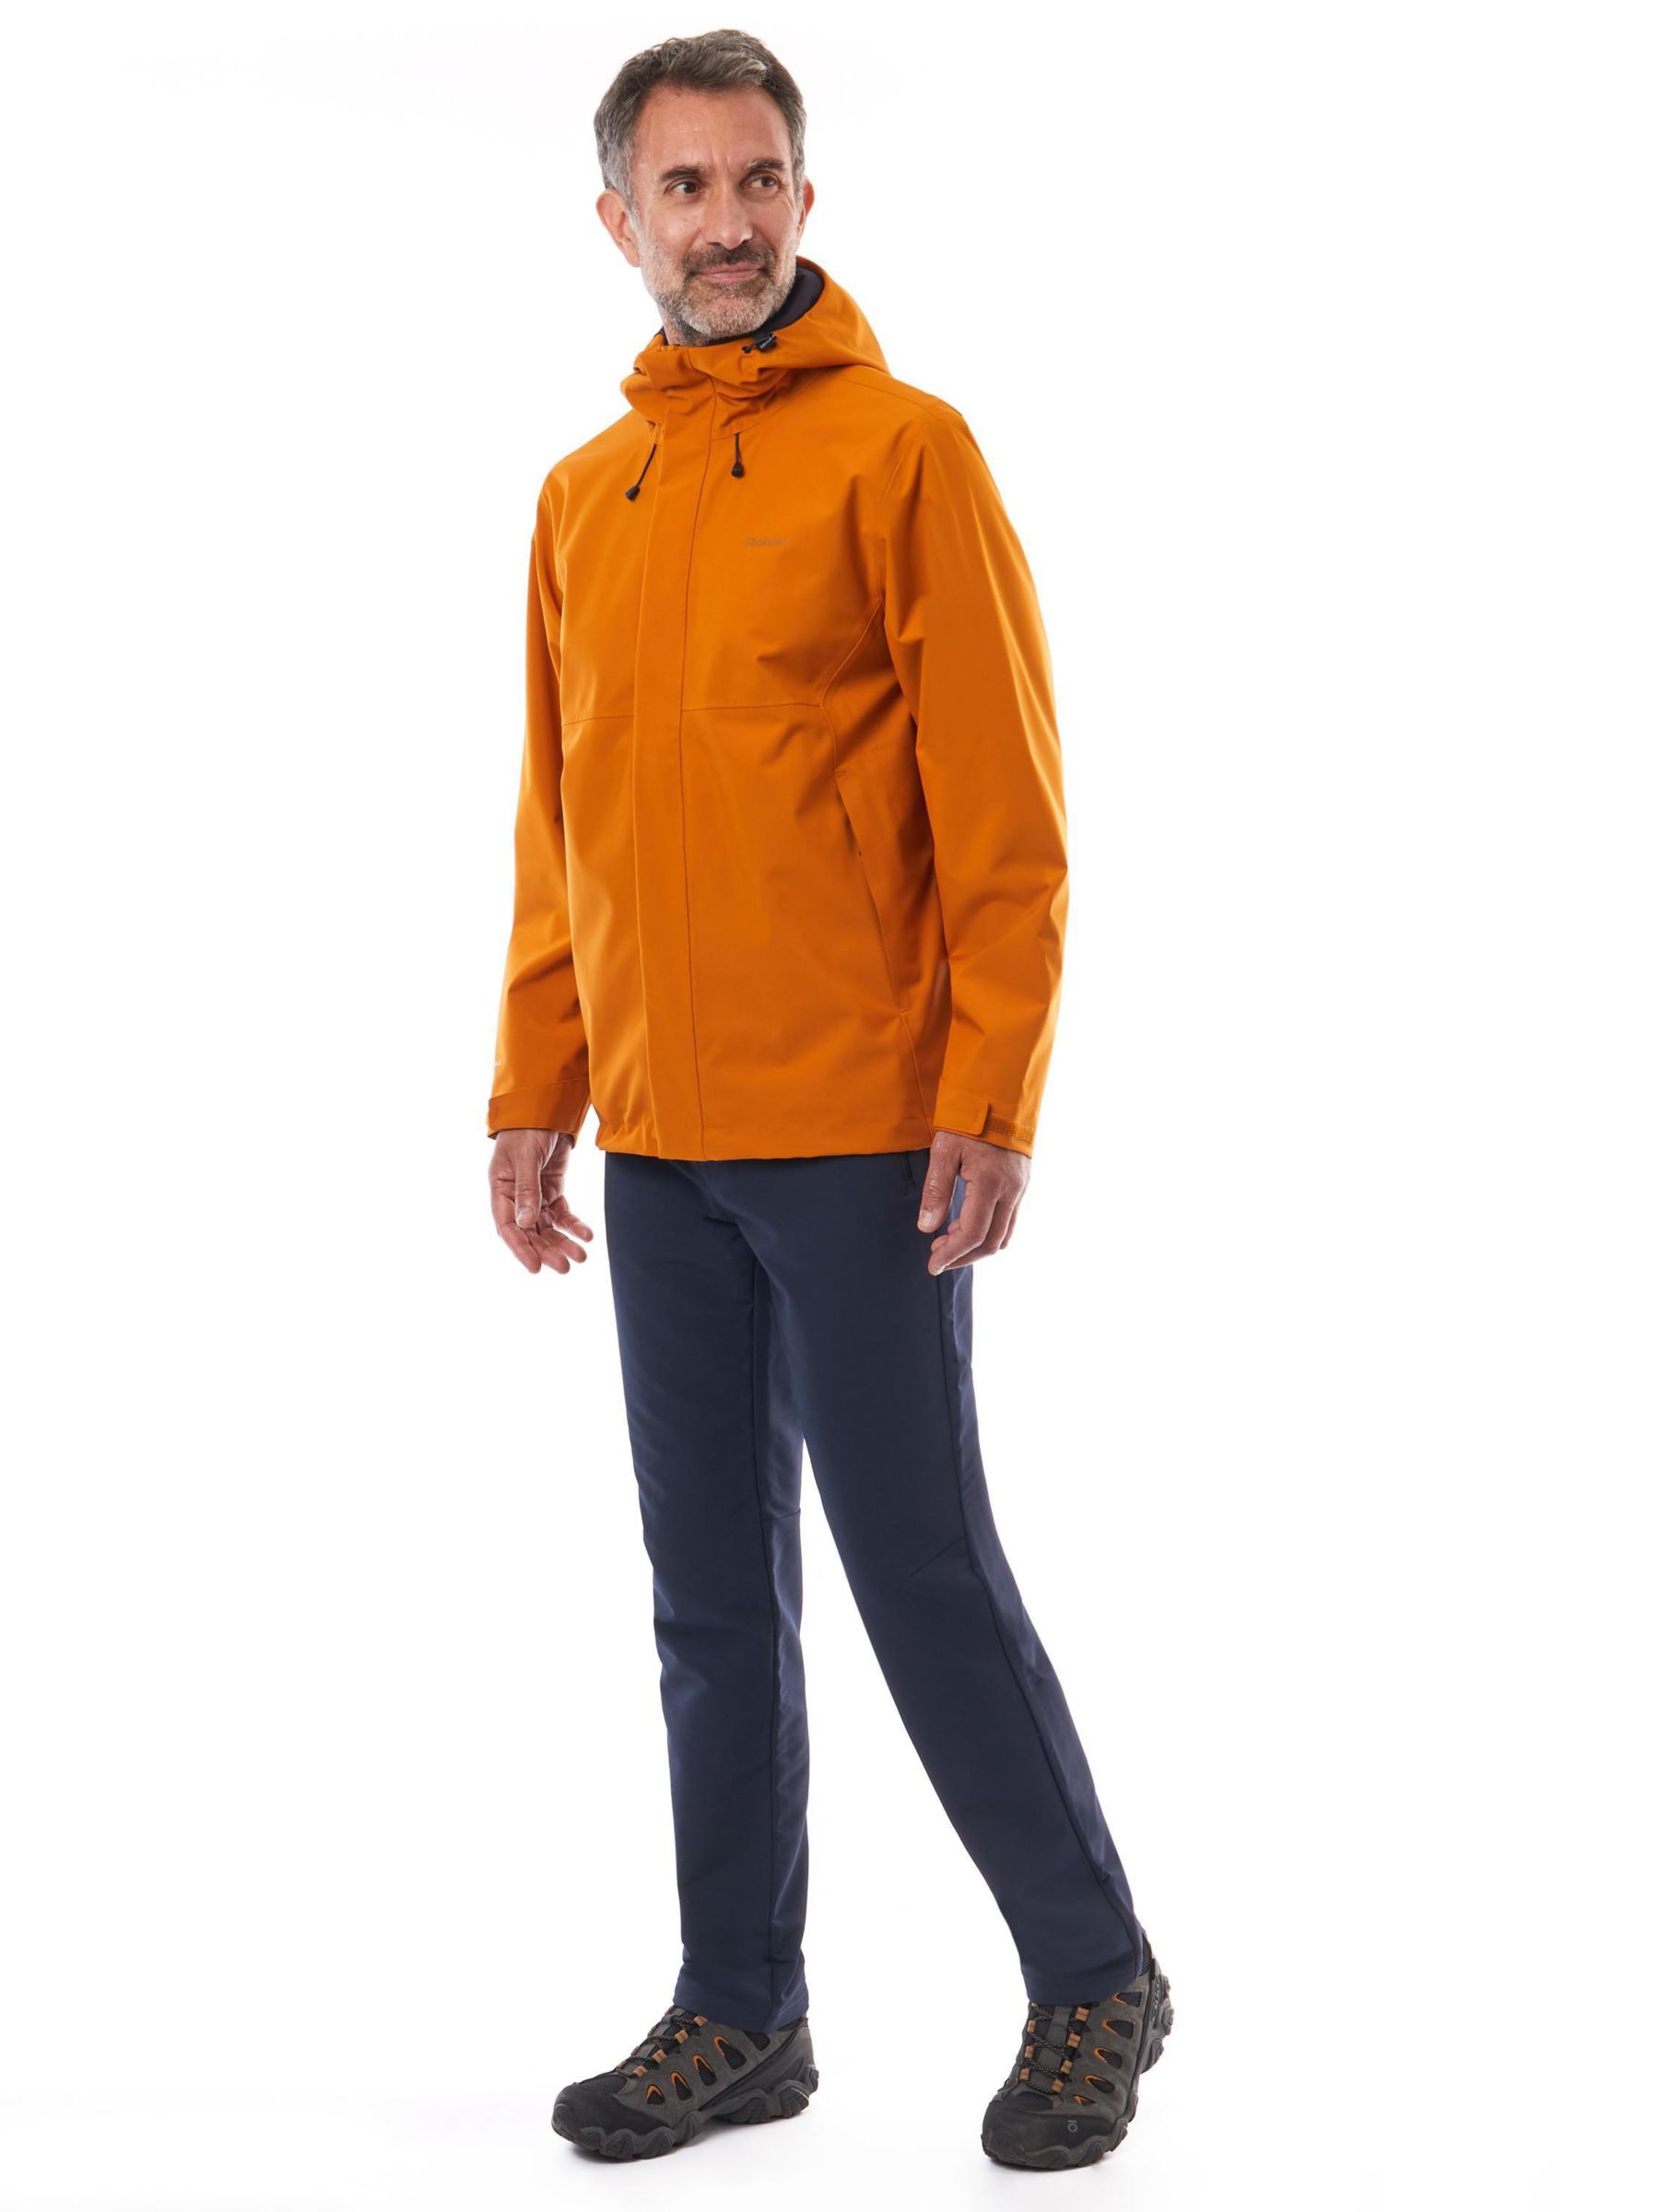 Buy Rohan Striders Hiking Trousers Online at johnlewis.com